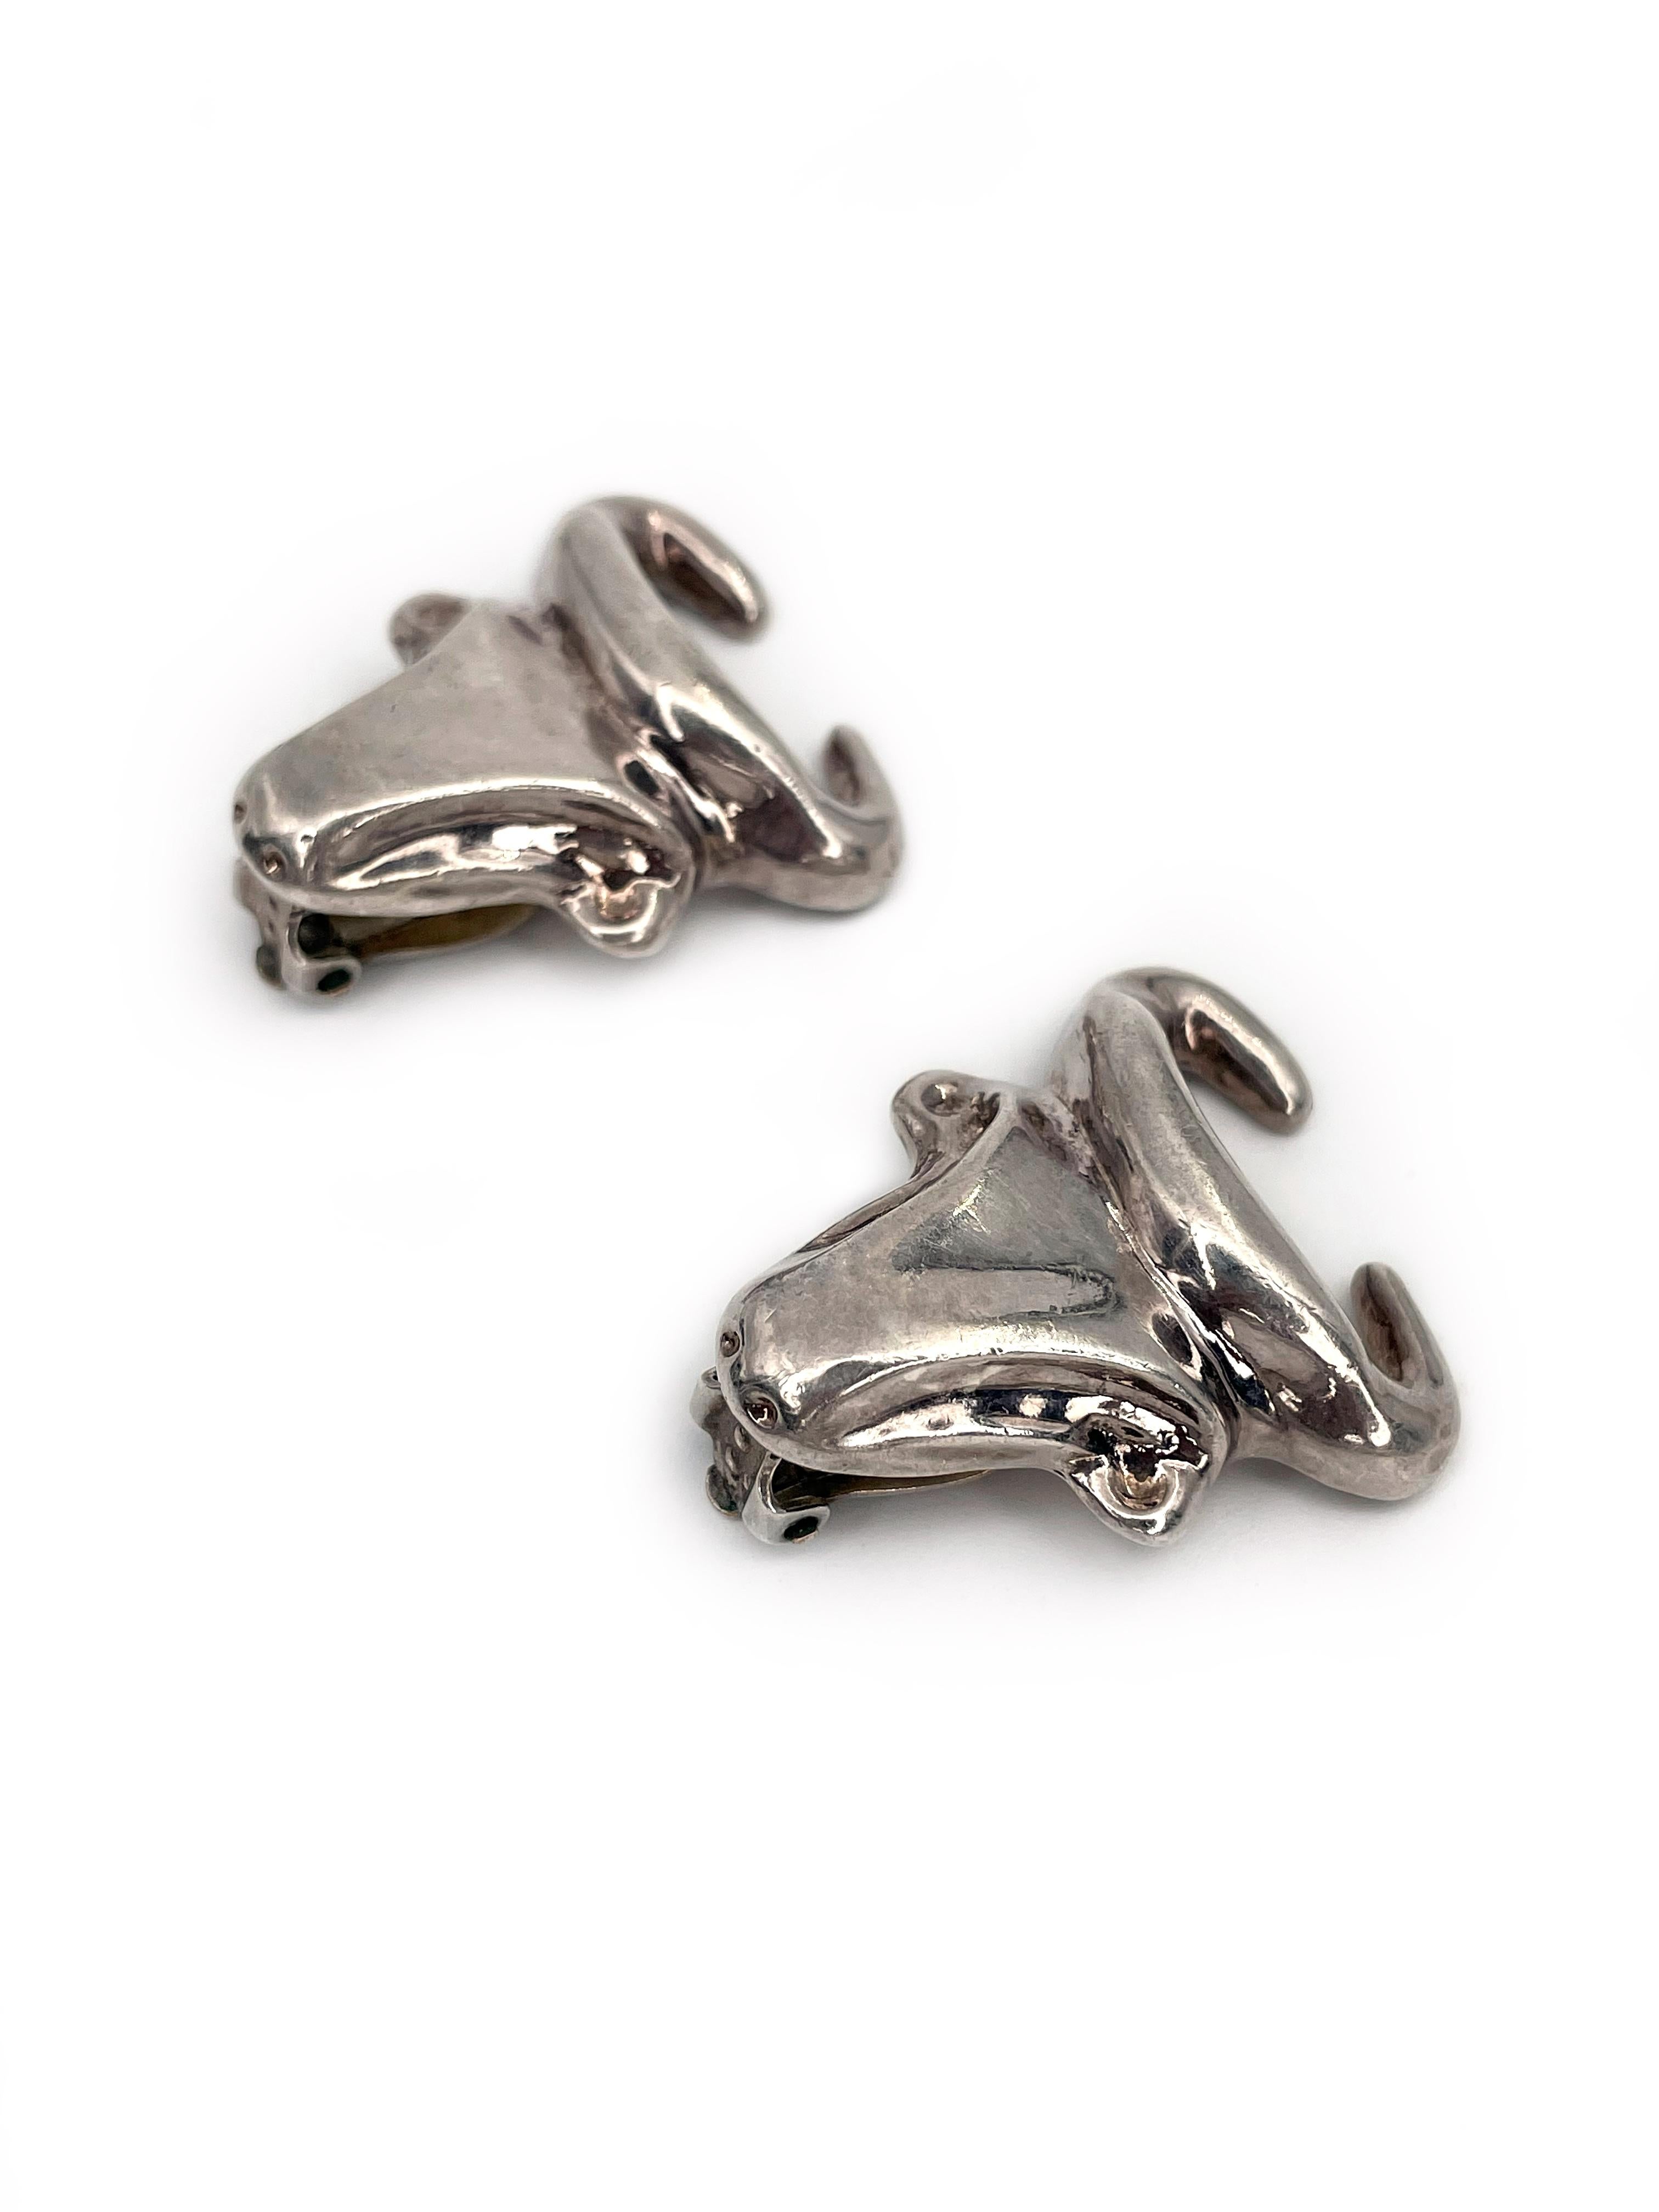 This is a pair of an iconic silver tone large bull head clip on earrings designed by Christian Lacroix in 1990’s. The piece is silver plated. 

Worth of attention of any stylish person. 

Markings: “Christian Lacroix - CL - Made in France”.

Size: